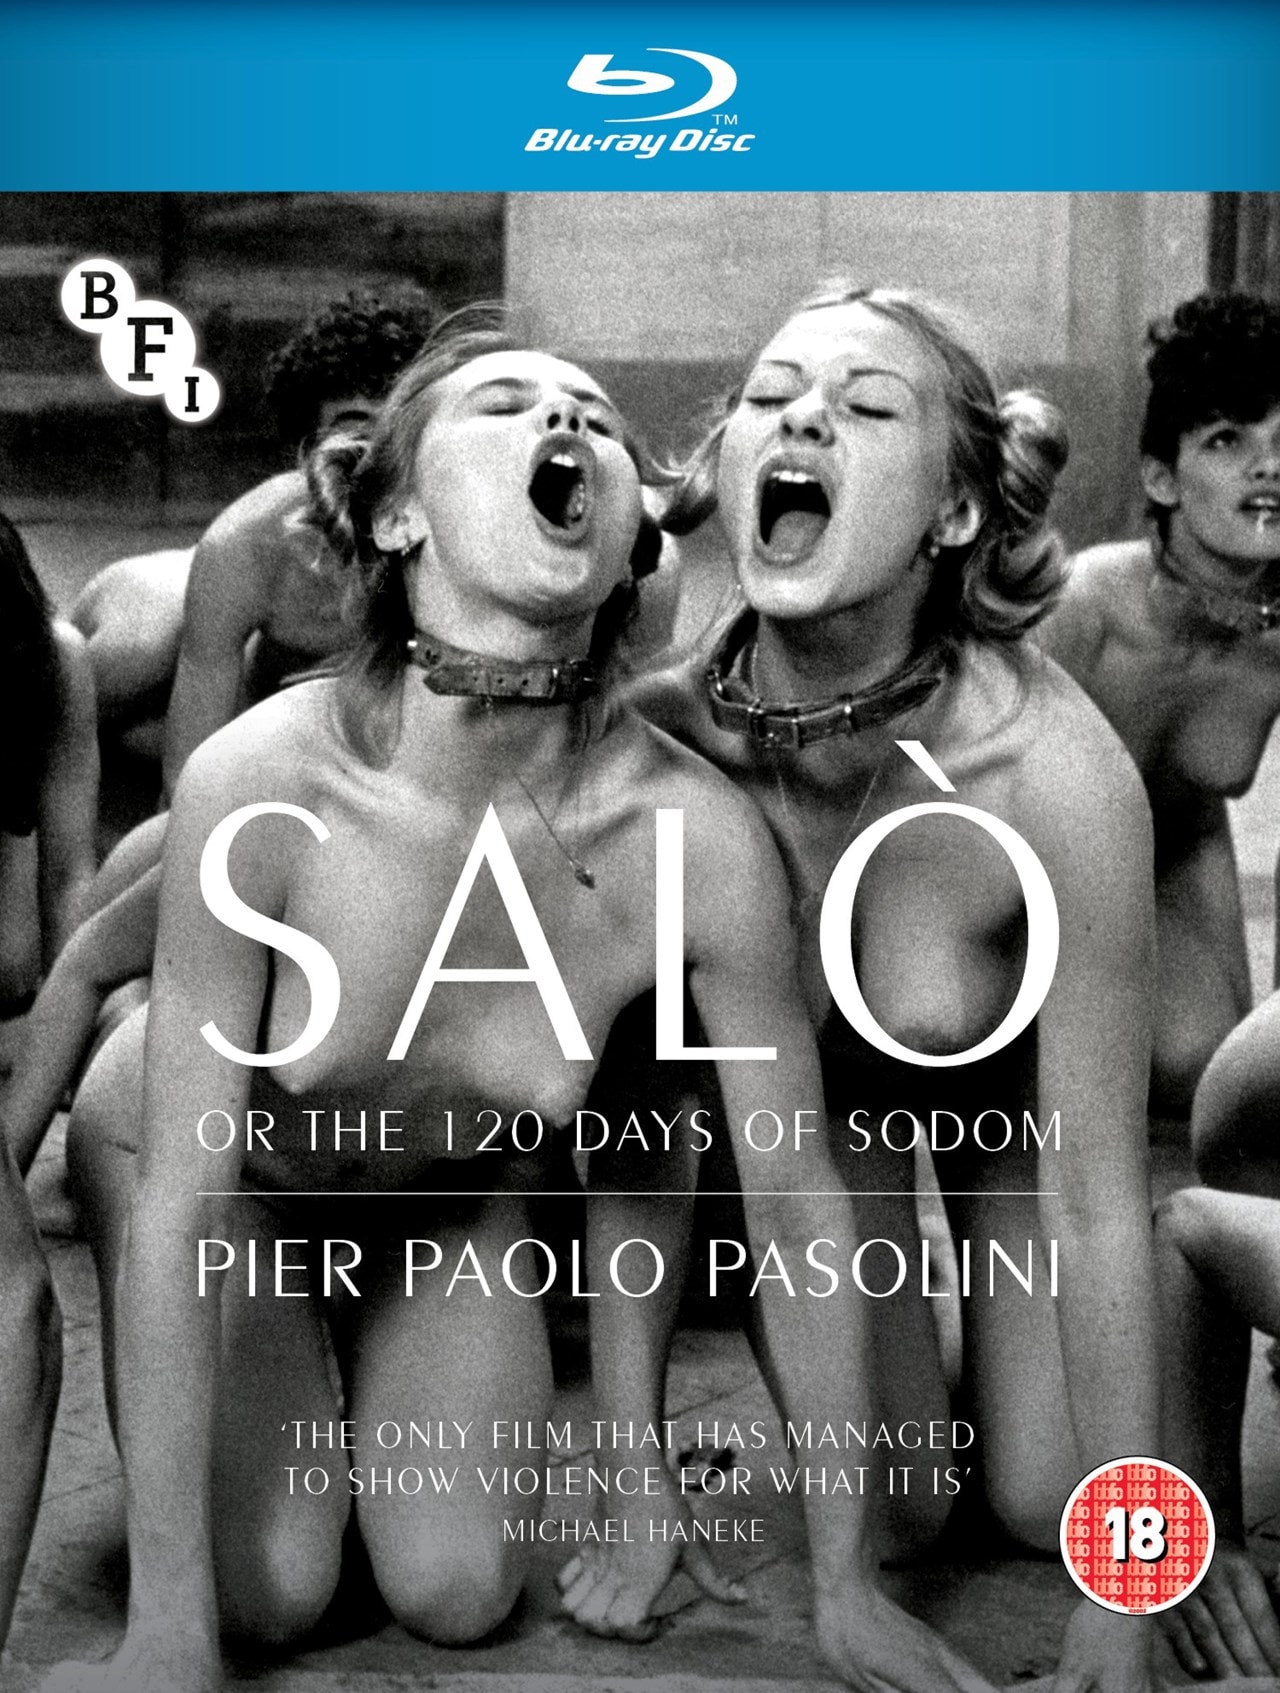 Salo or the 120 Days of Sodom - Blu-ray Disc | Pier Paolo Pasolini